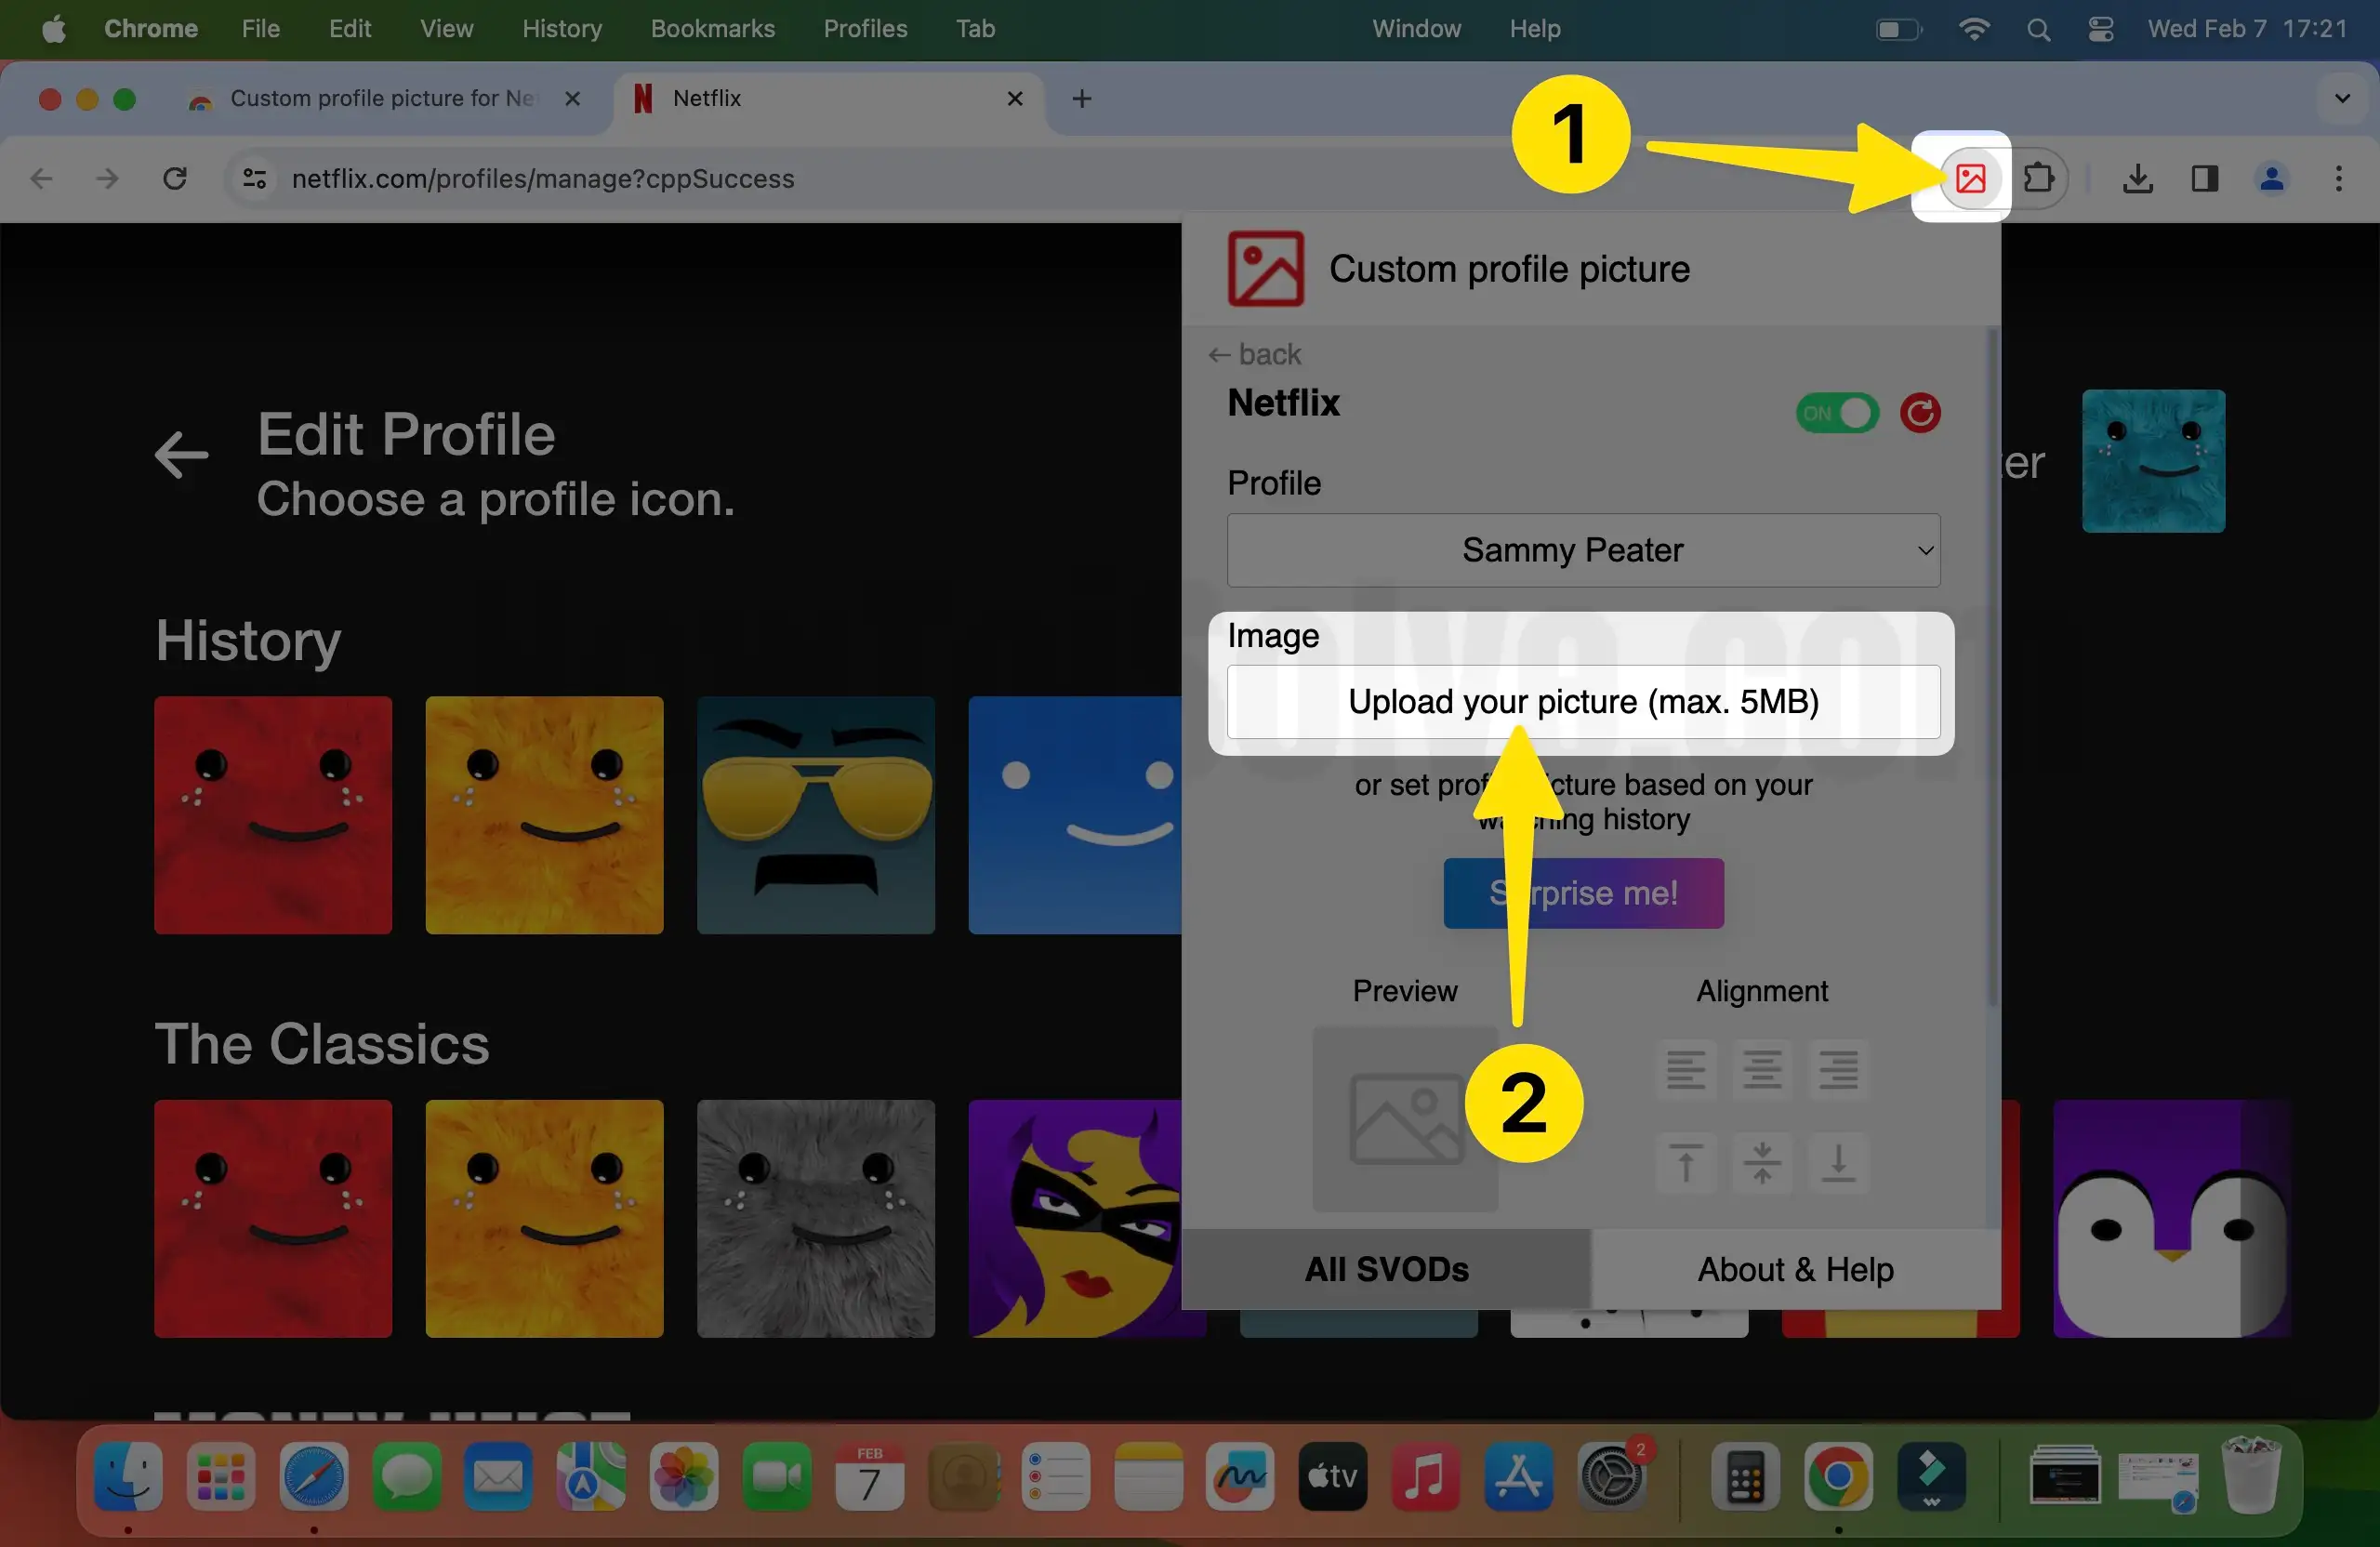 Click custom profile picture select Upload your picture on mac